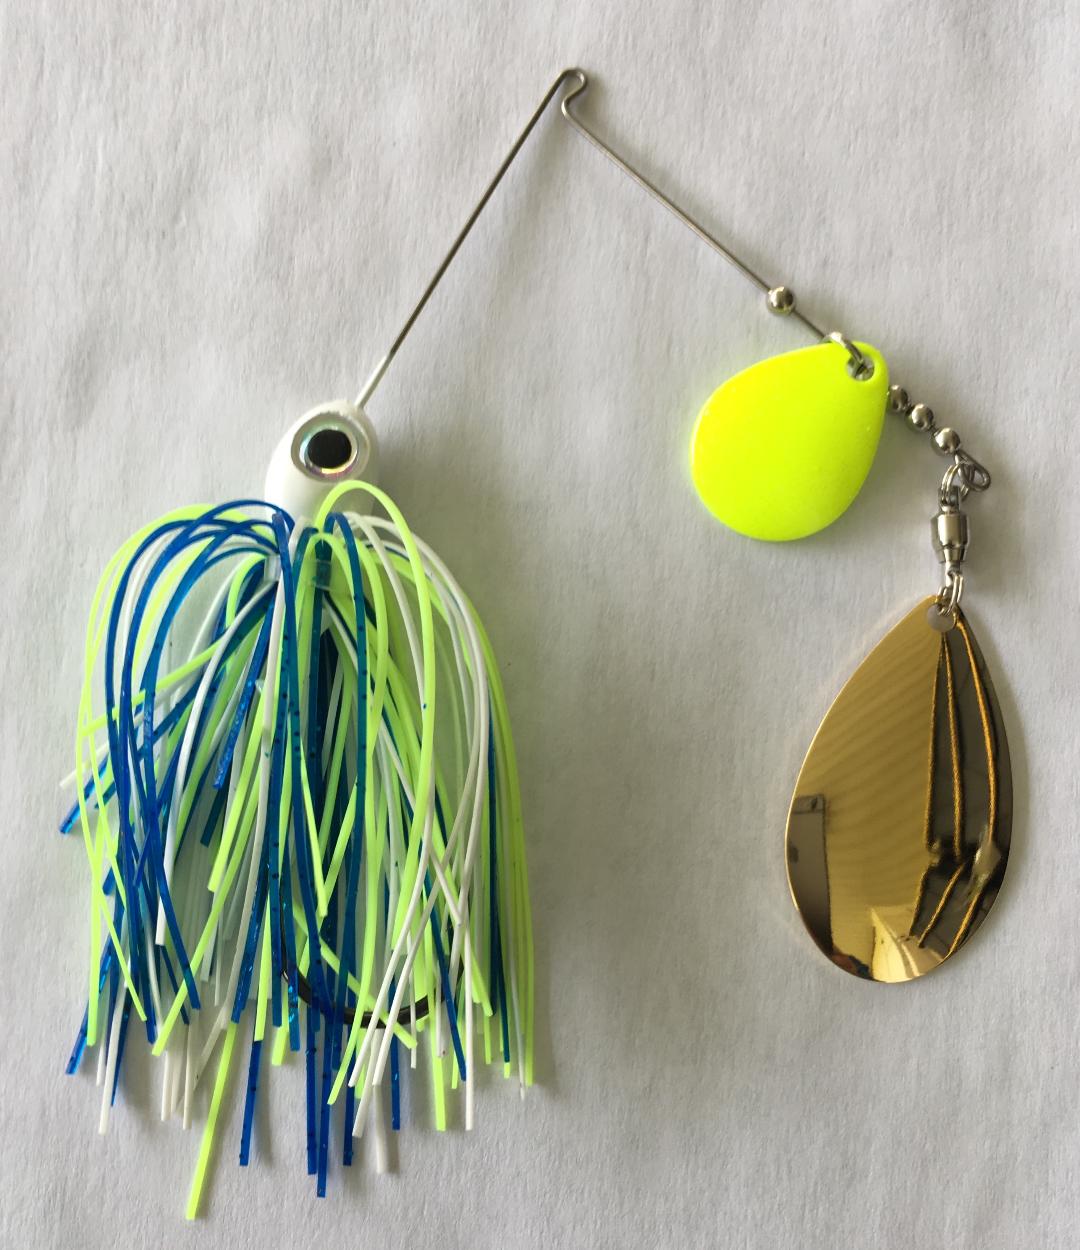 3/8 oz Blue / White / Chartreuse Spinner Baits